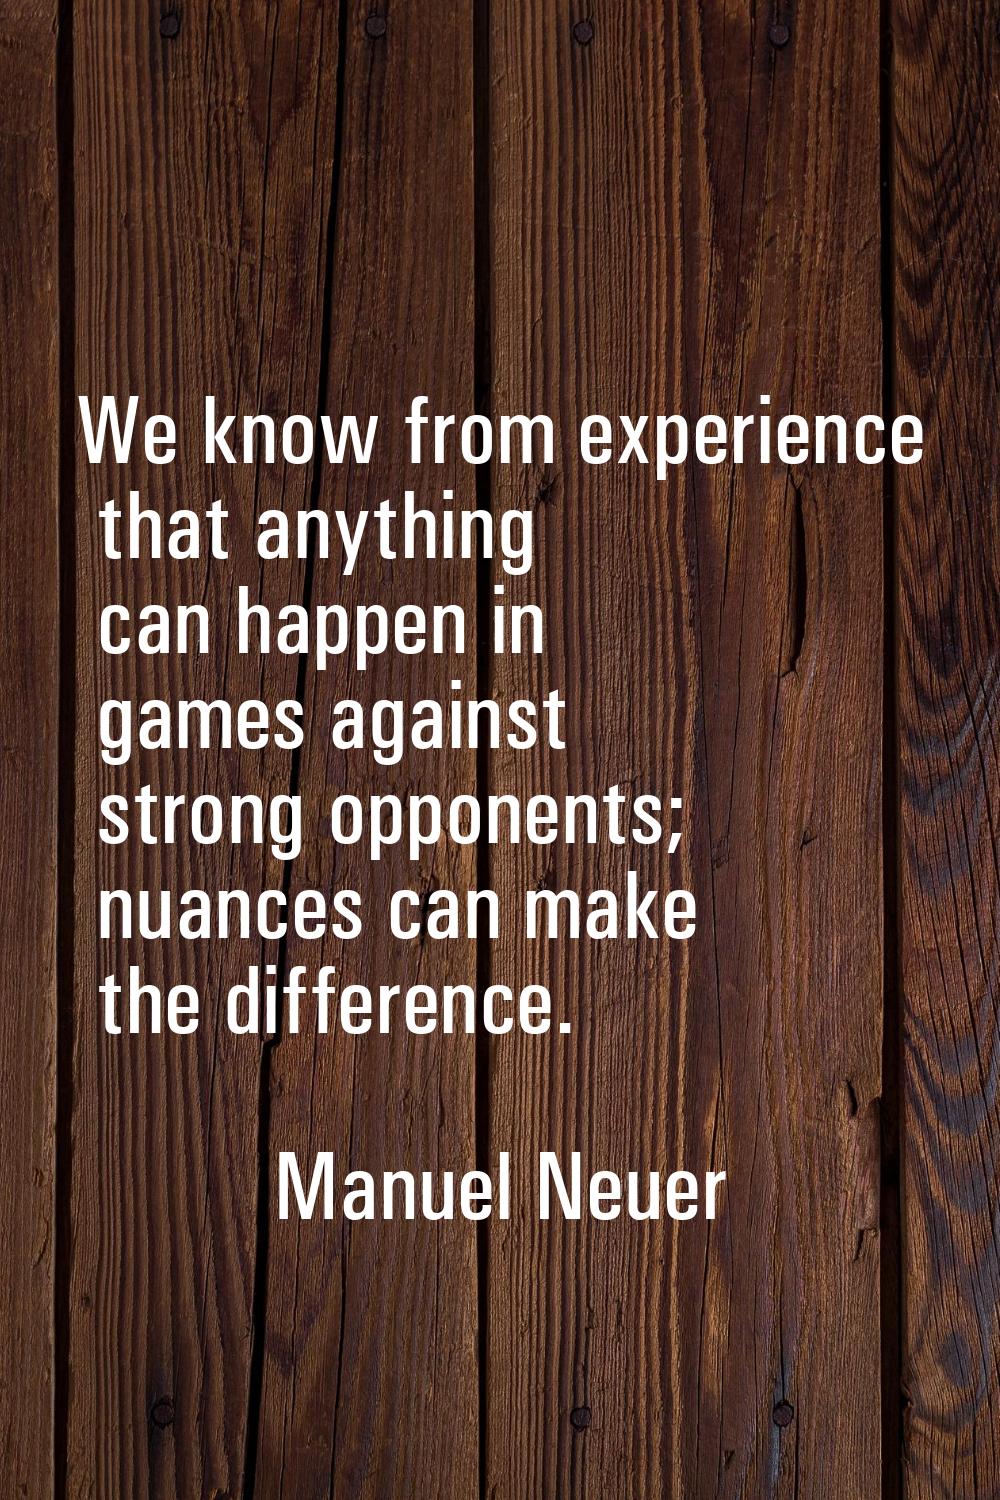 We know from experience that anything can happen in games against strong opponents; nuances can mak